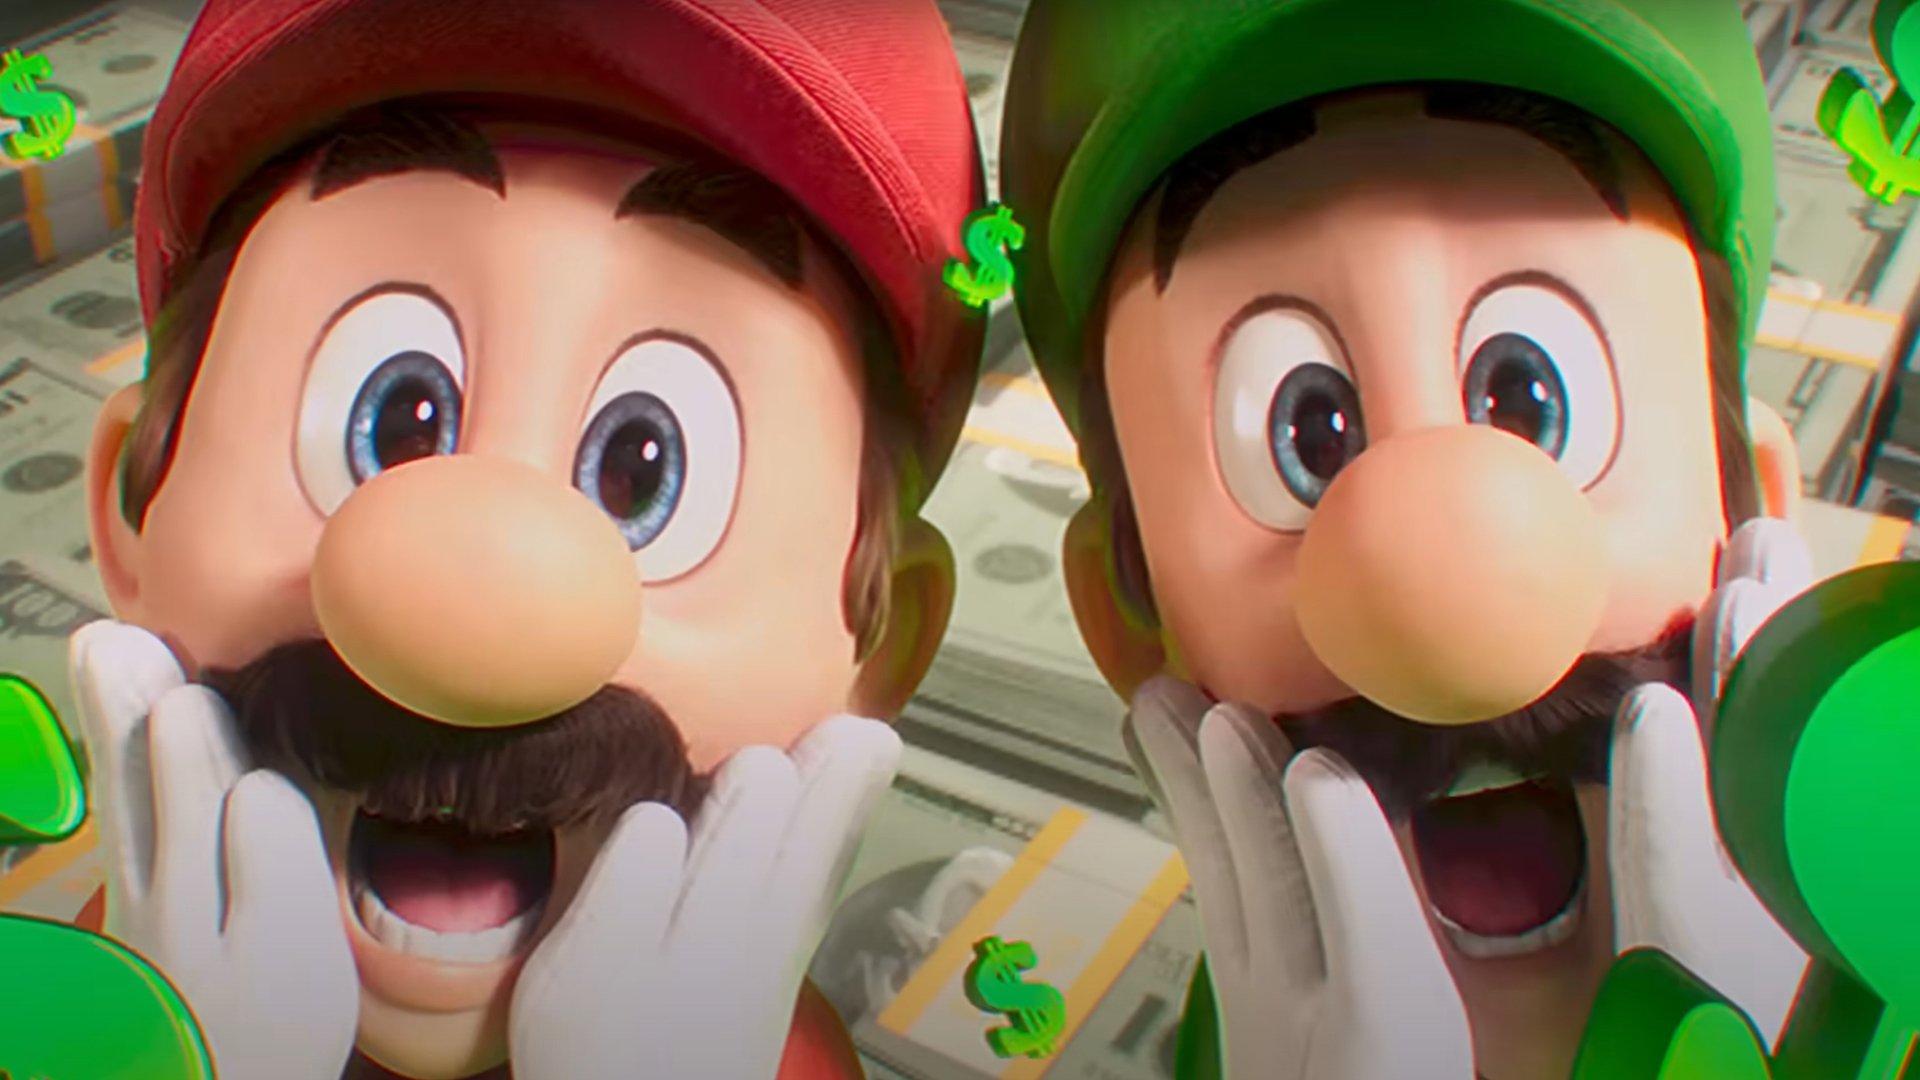 The Super Mario Bros Movie is eyeing box office records following a